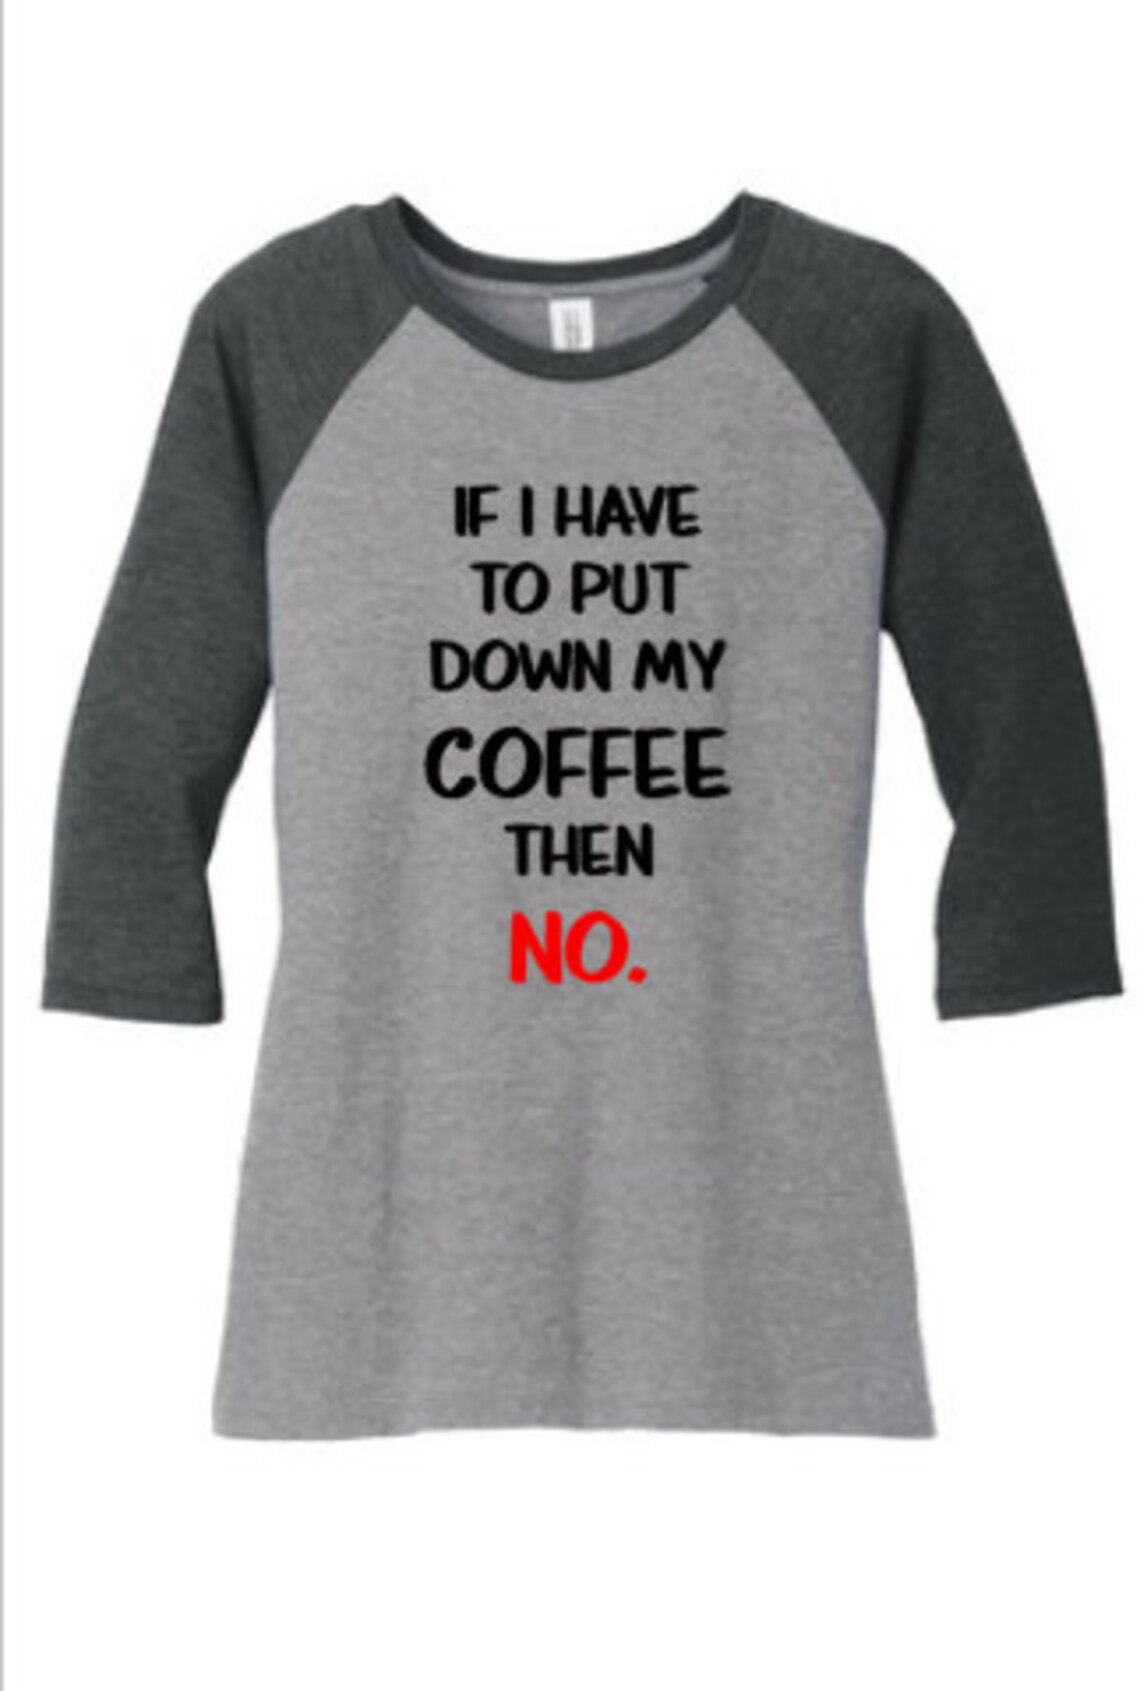 If I Have To Put My Coffee Down Then NO. A Coffee | Etsy